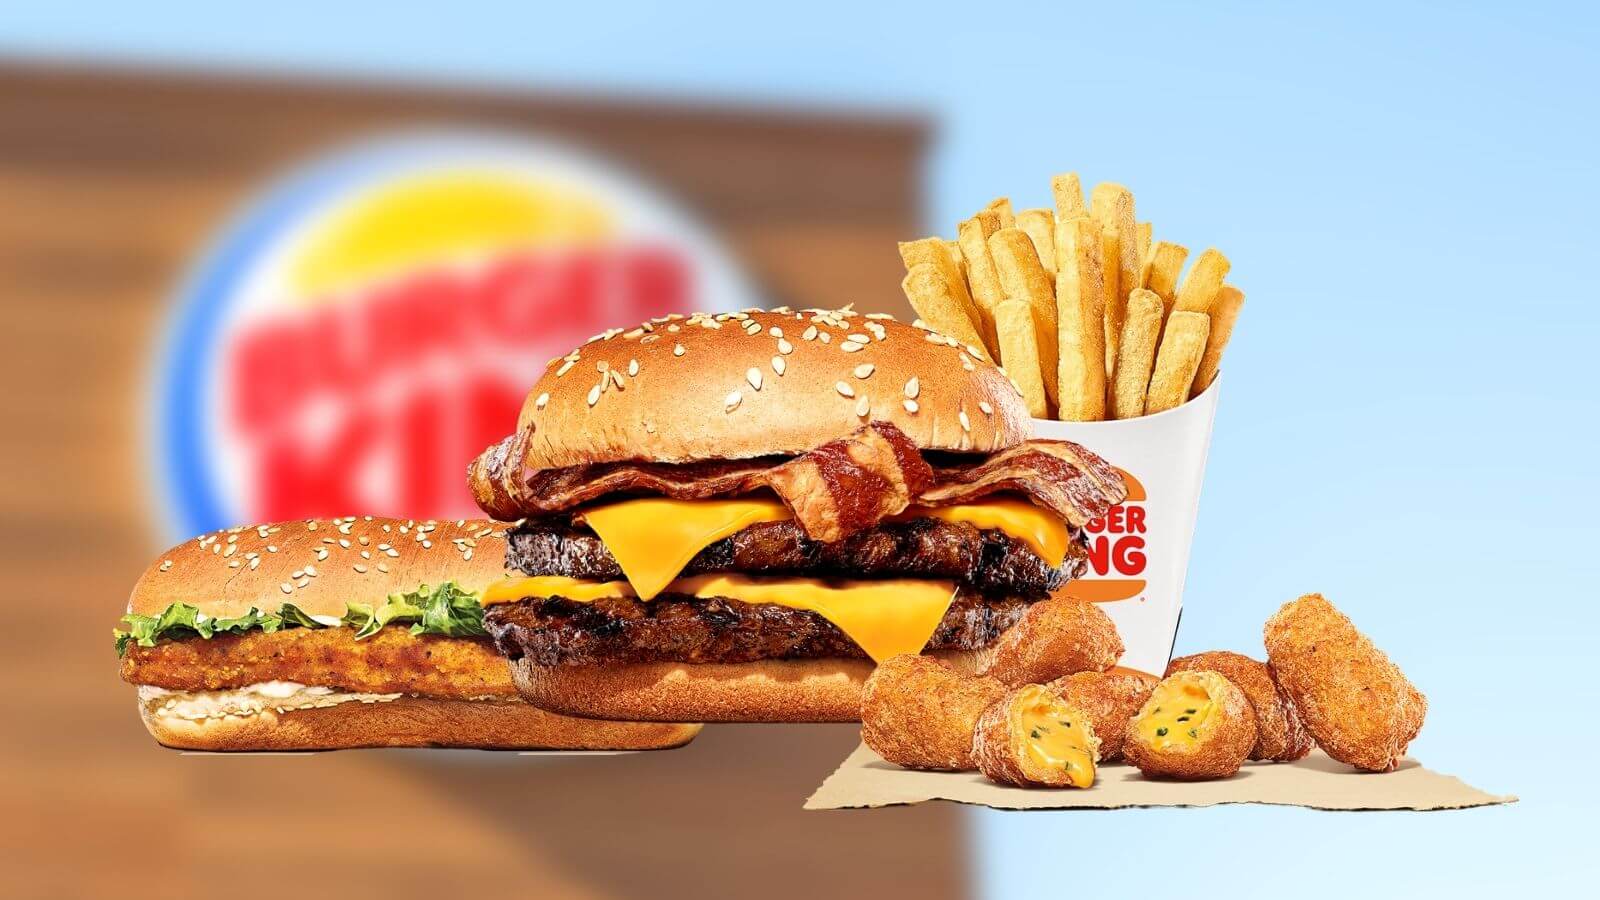 Read more about the article Burger King London Goes Into a Month of Green Eating